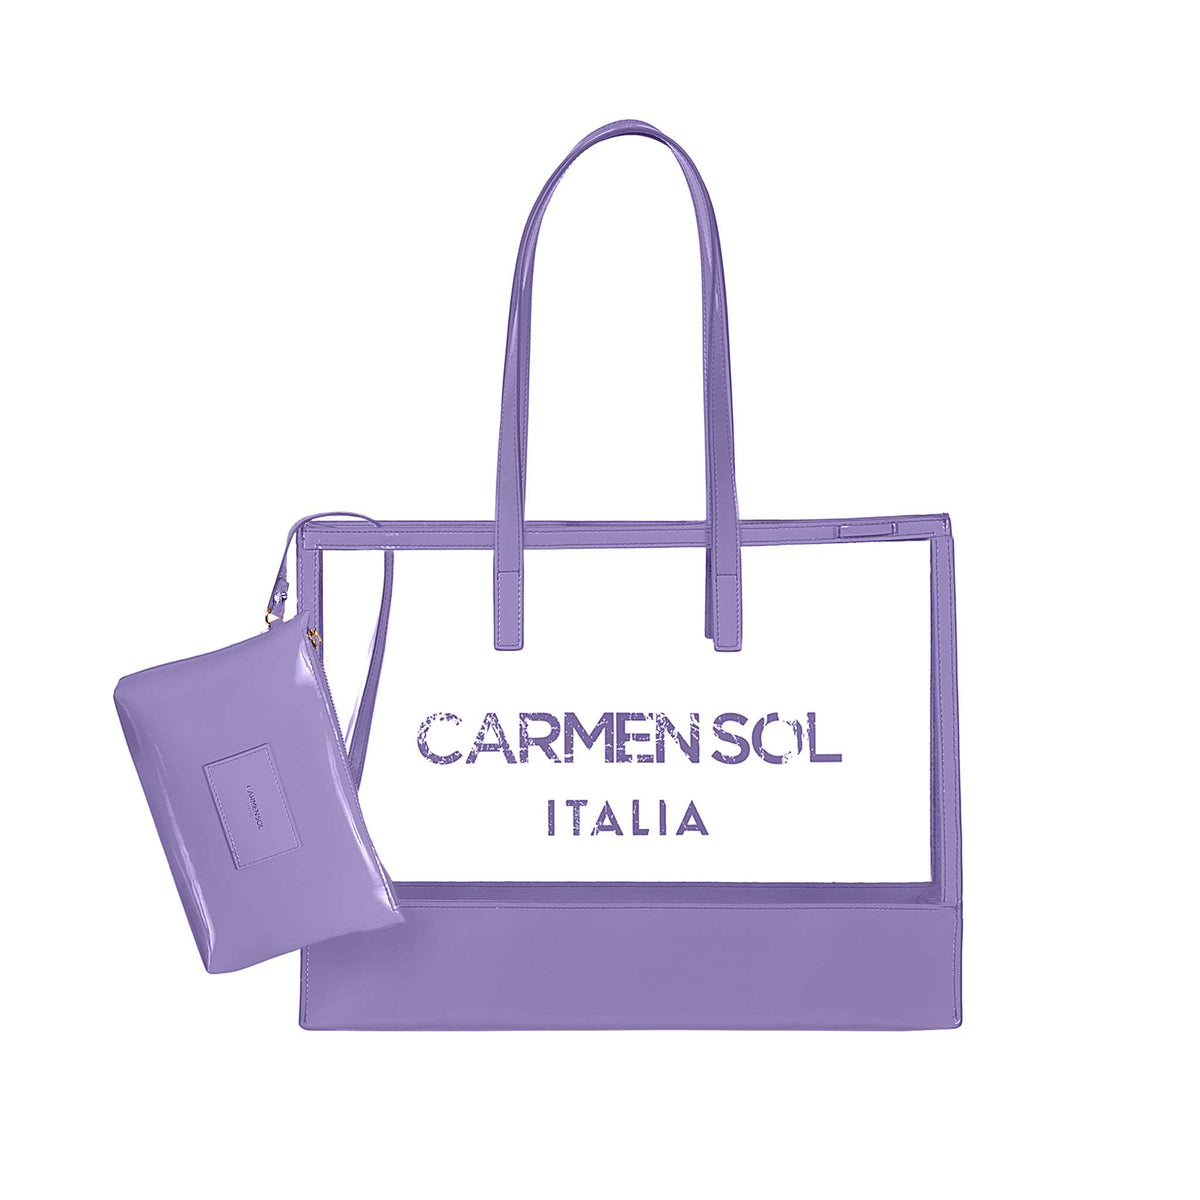 Made in Italy Taormina beach bags for women in color violet